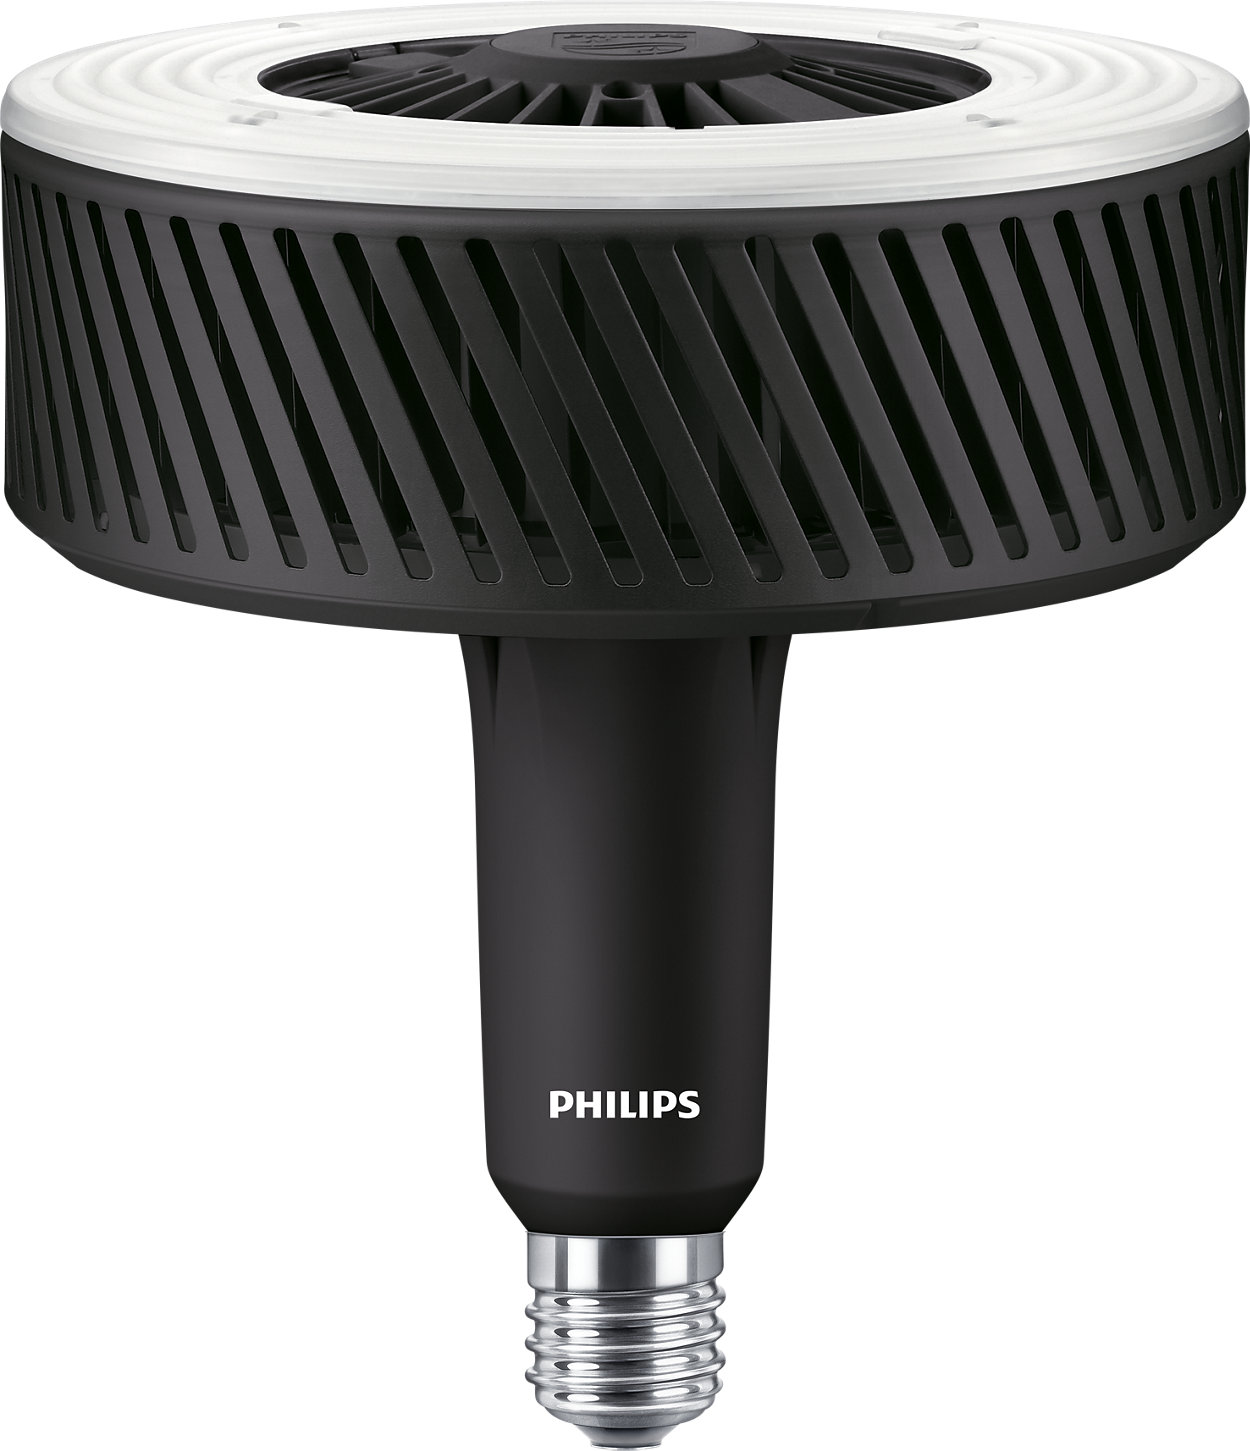 Philips TrueForce - A simple, low cost LED replacement for HID high-bay lamps for retail and industry with instant savings 